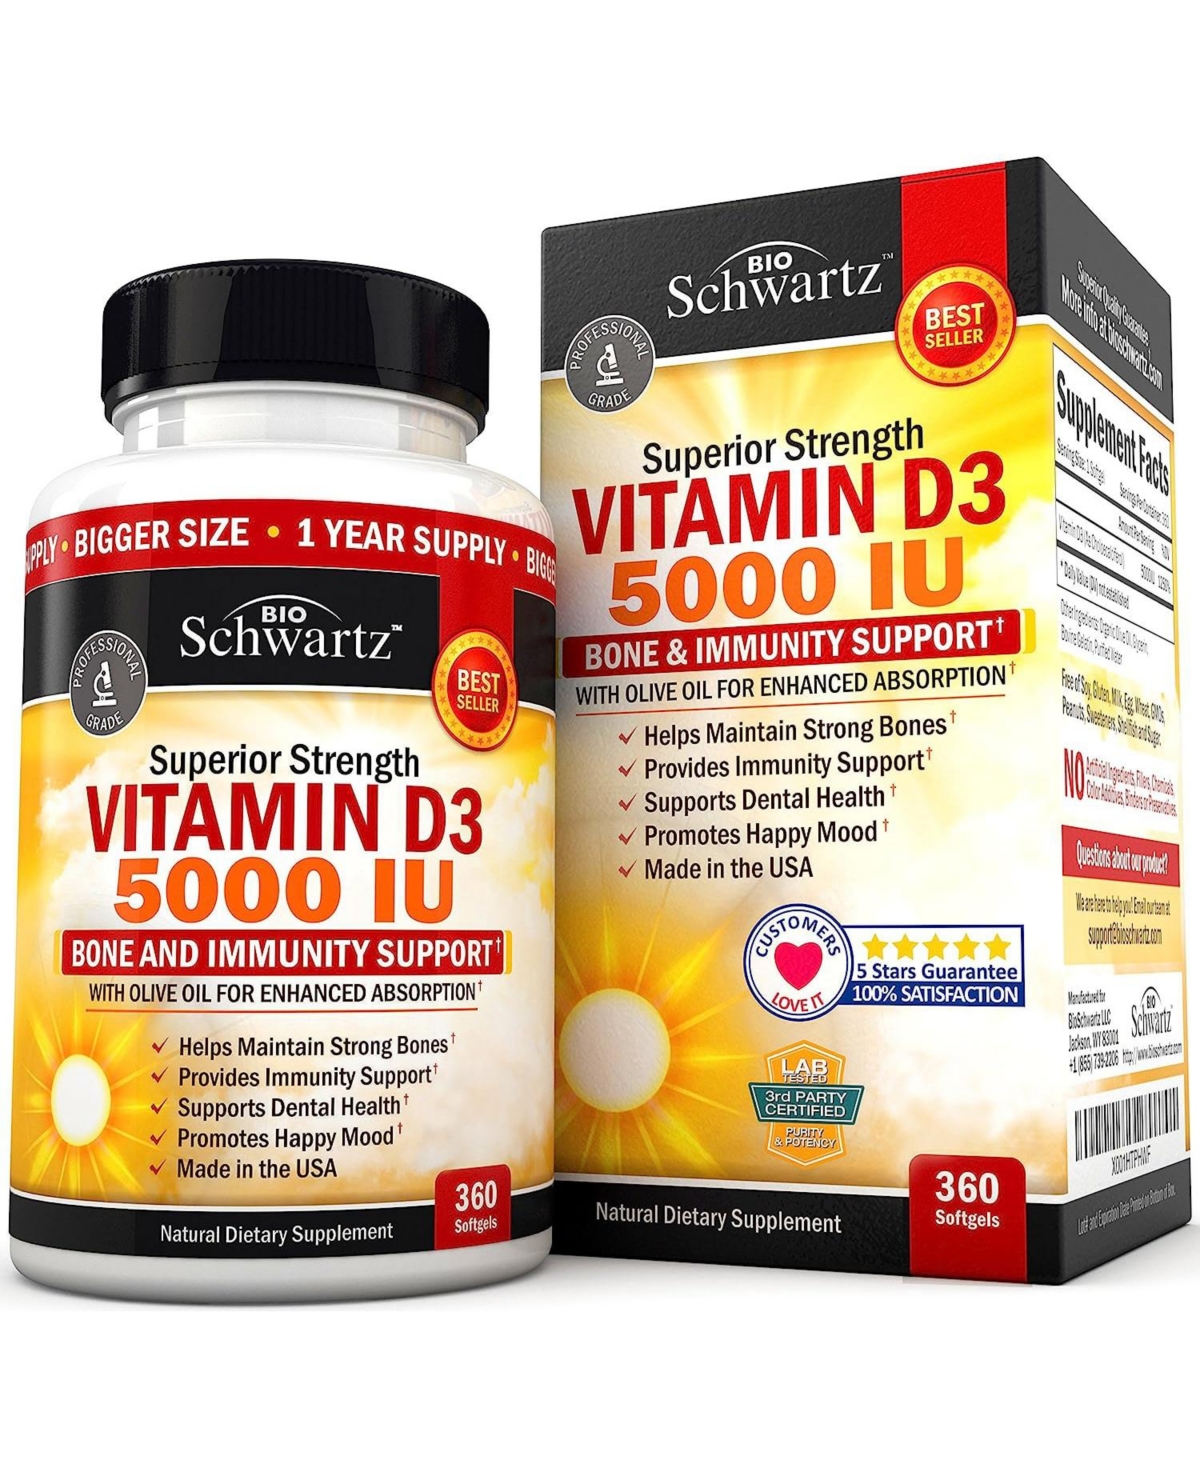 Vitamin D3 5000 Iu (125 mcg) Natural Immune Support Supplement, Bone Strength, Healthy Muscle Function, with Olive Oil for Highest Absorption, Gluten